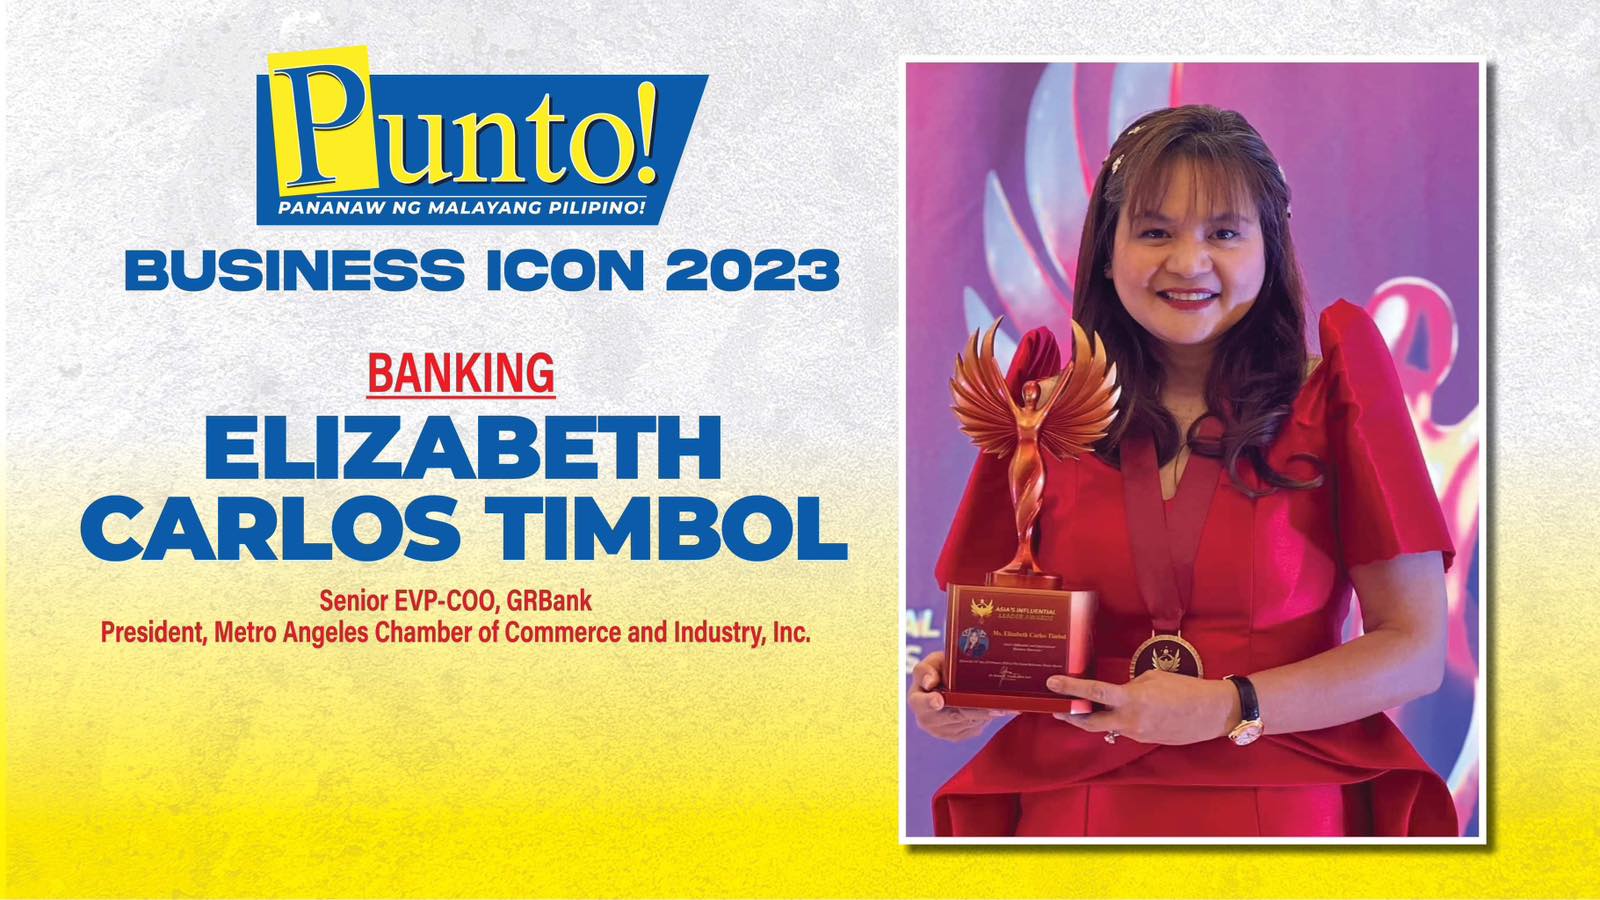 BIZ ICONS 2023/BANKING: ELIZABETH CARLOS TIMBOL Senior EVP-COO, GRBank President, Metro Angeles Chamber of Commerce and Industry, Inc. - Punto! Central Luzon